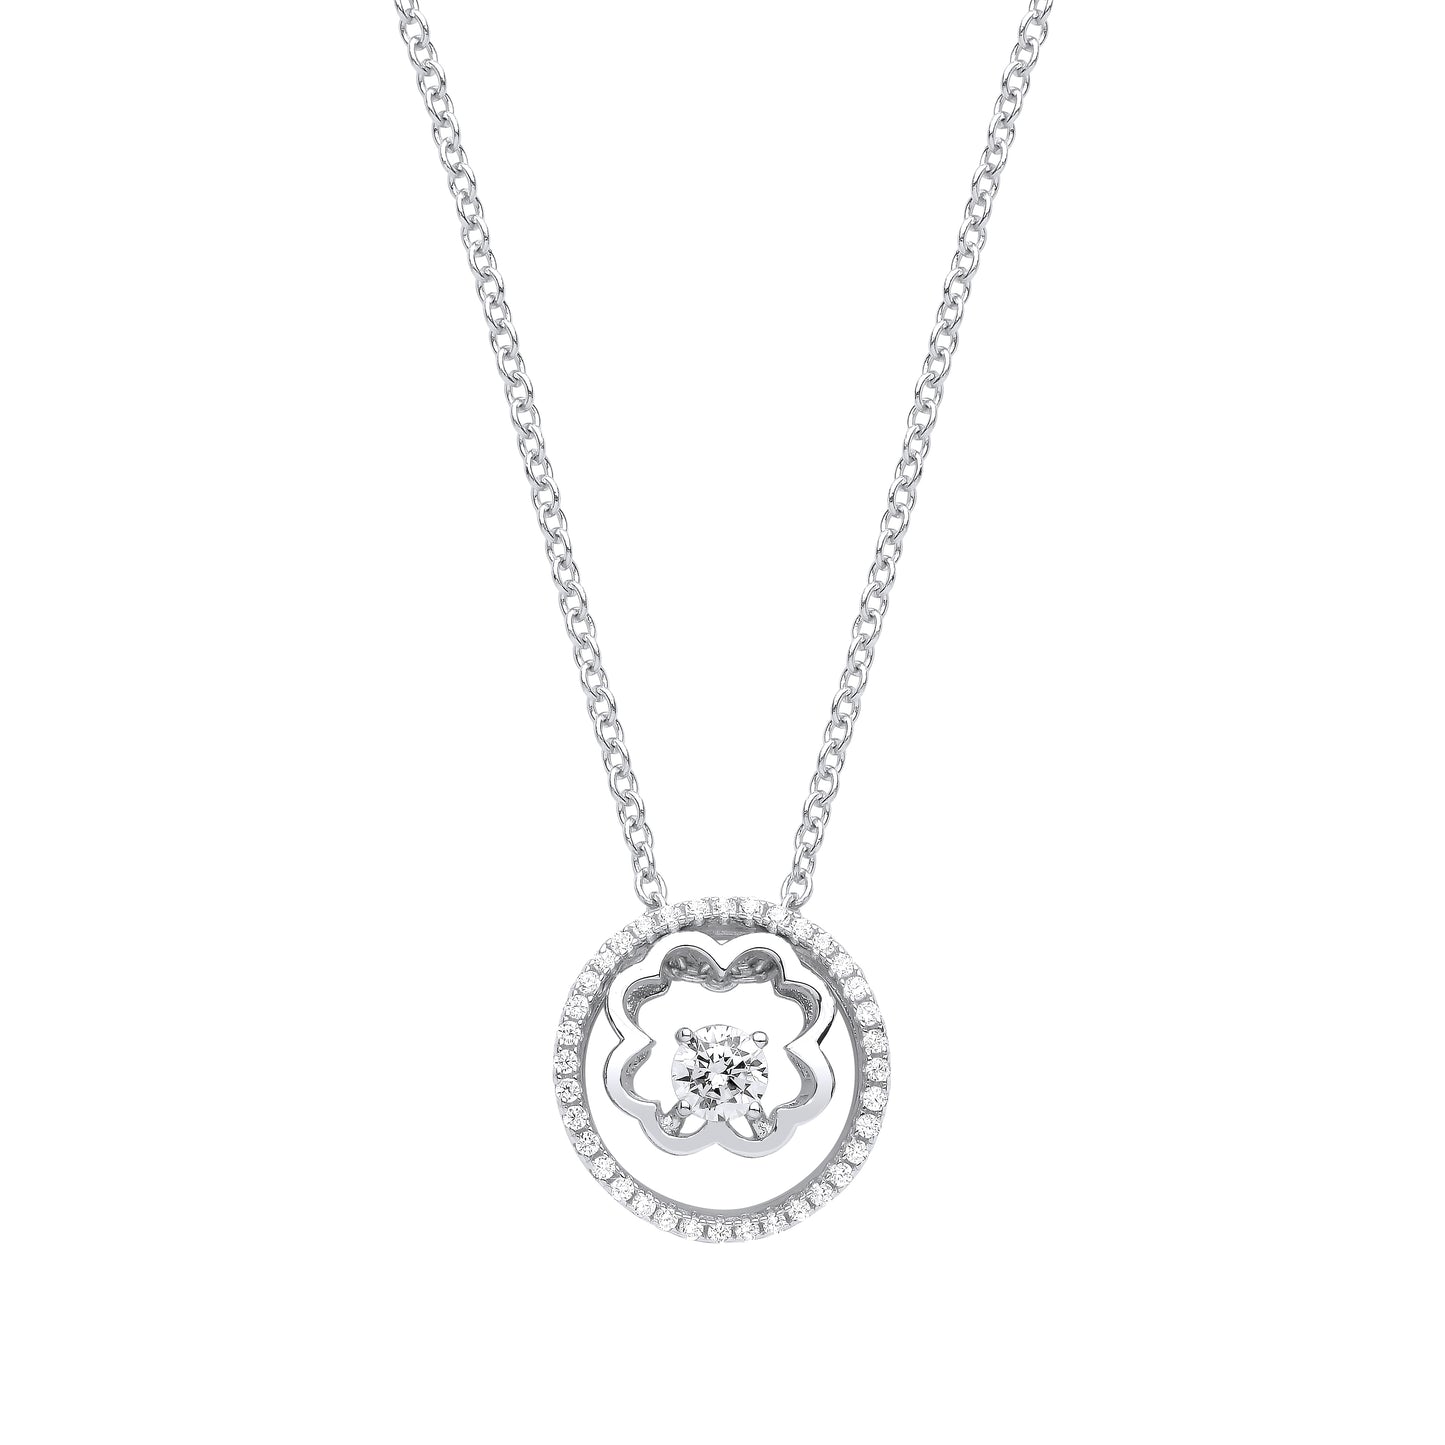 Silver  4 Leaf Clover Circle of Life Solitaire Lavalier Necklace - GVK367